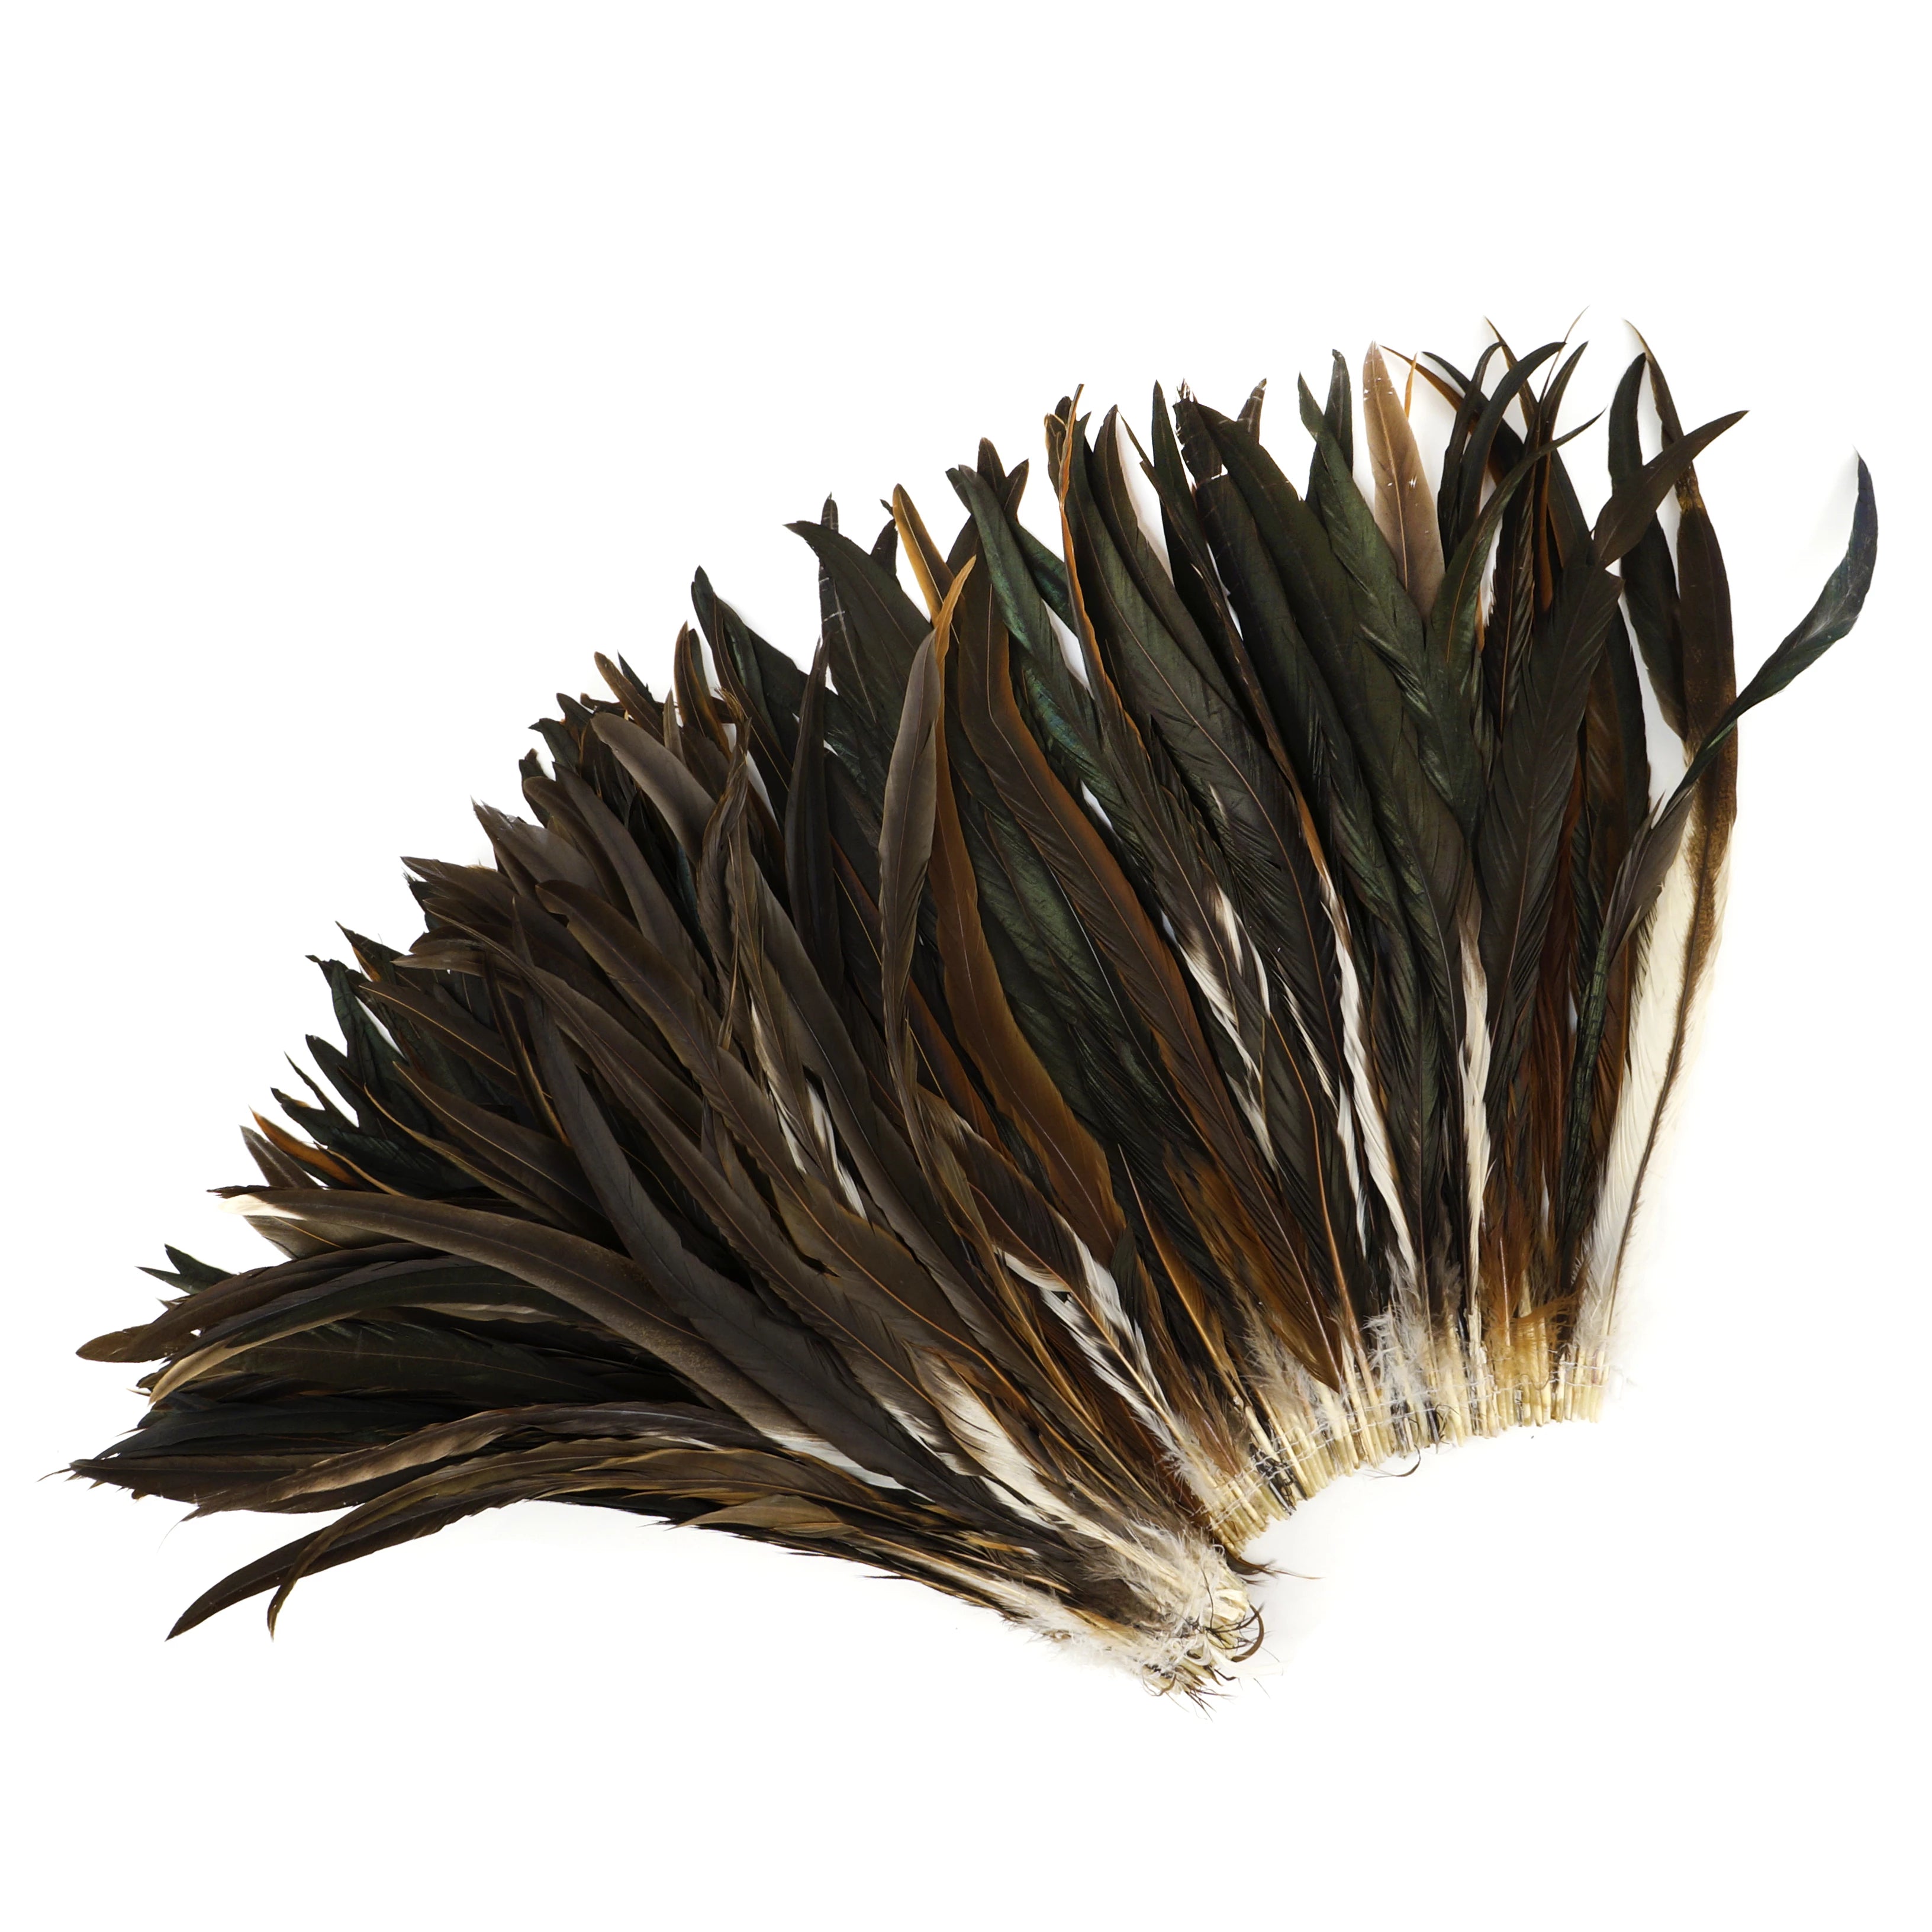 Neon Yellow Rooster Hackle Feathers - Bulk lb